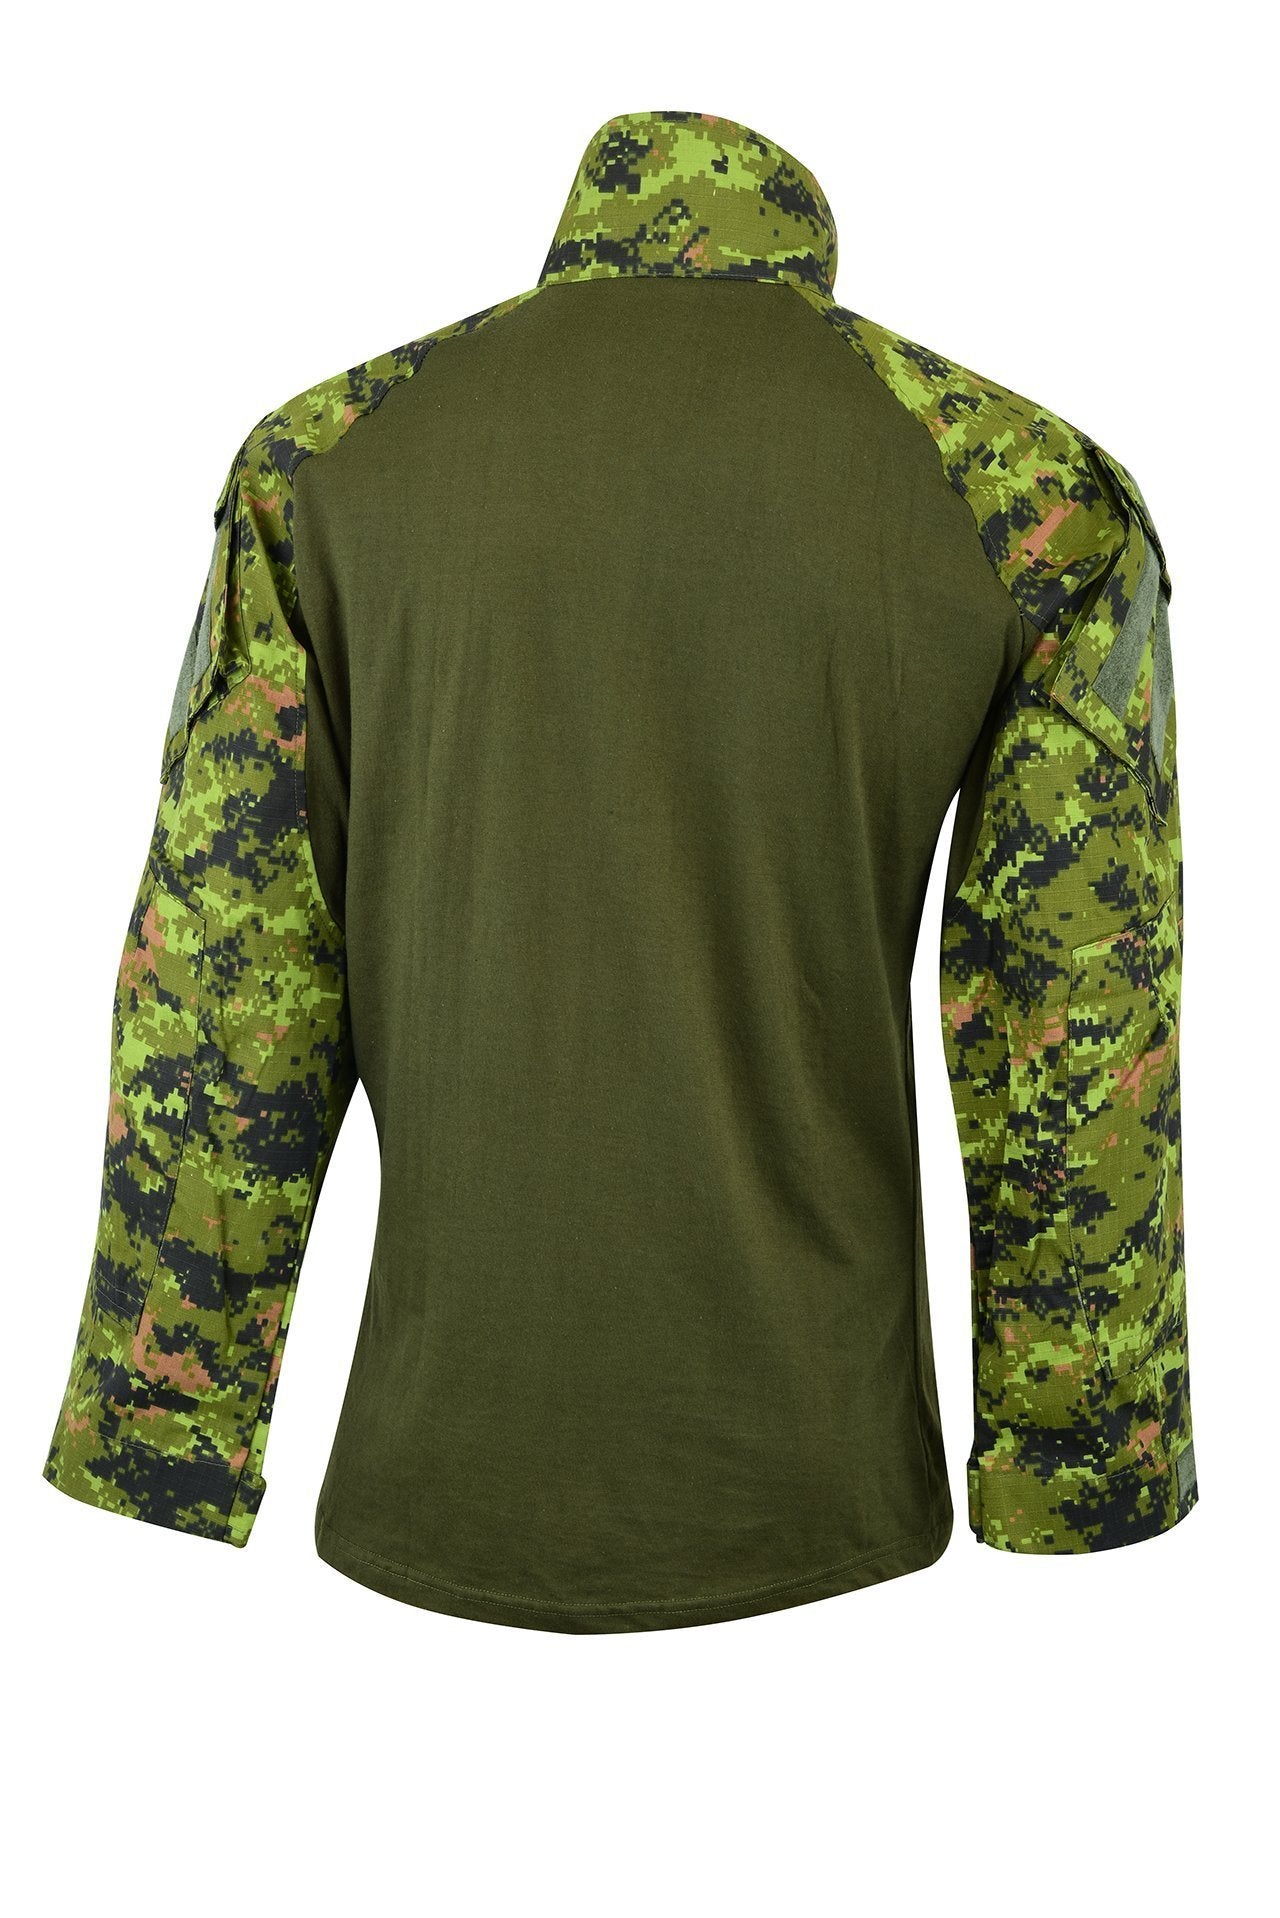 HYBRID TACTICAL SHIRT IS A PERFECT COMBAT SHIRT Colour CadPad Back